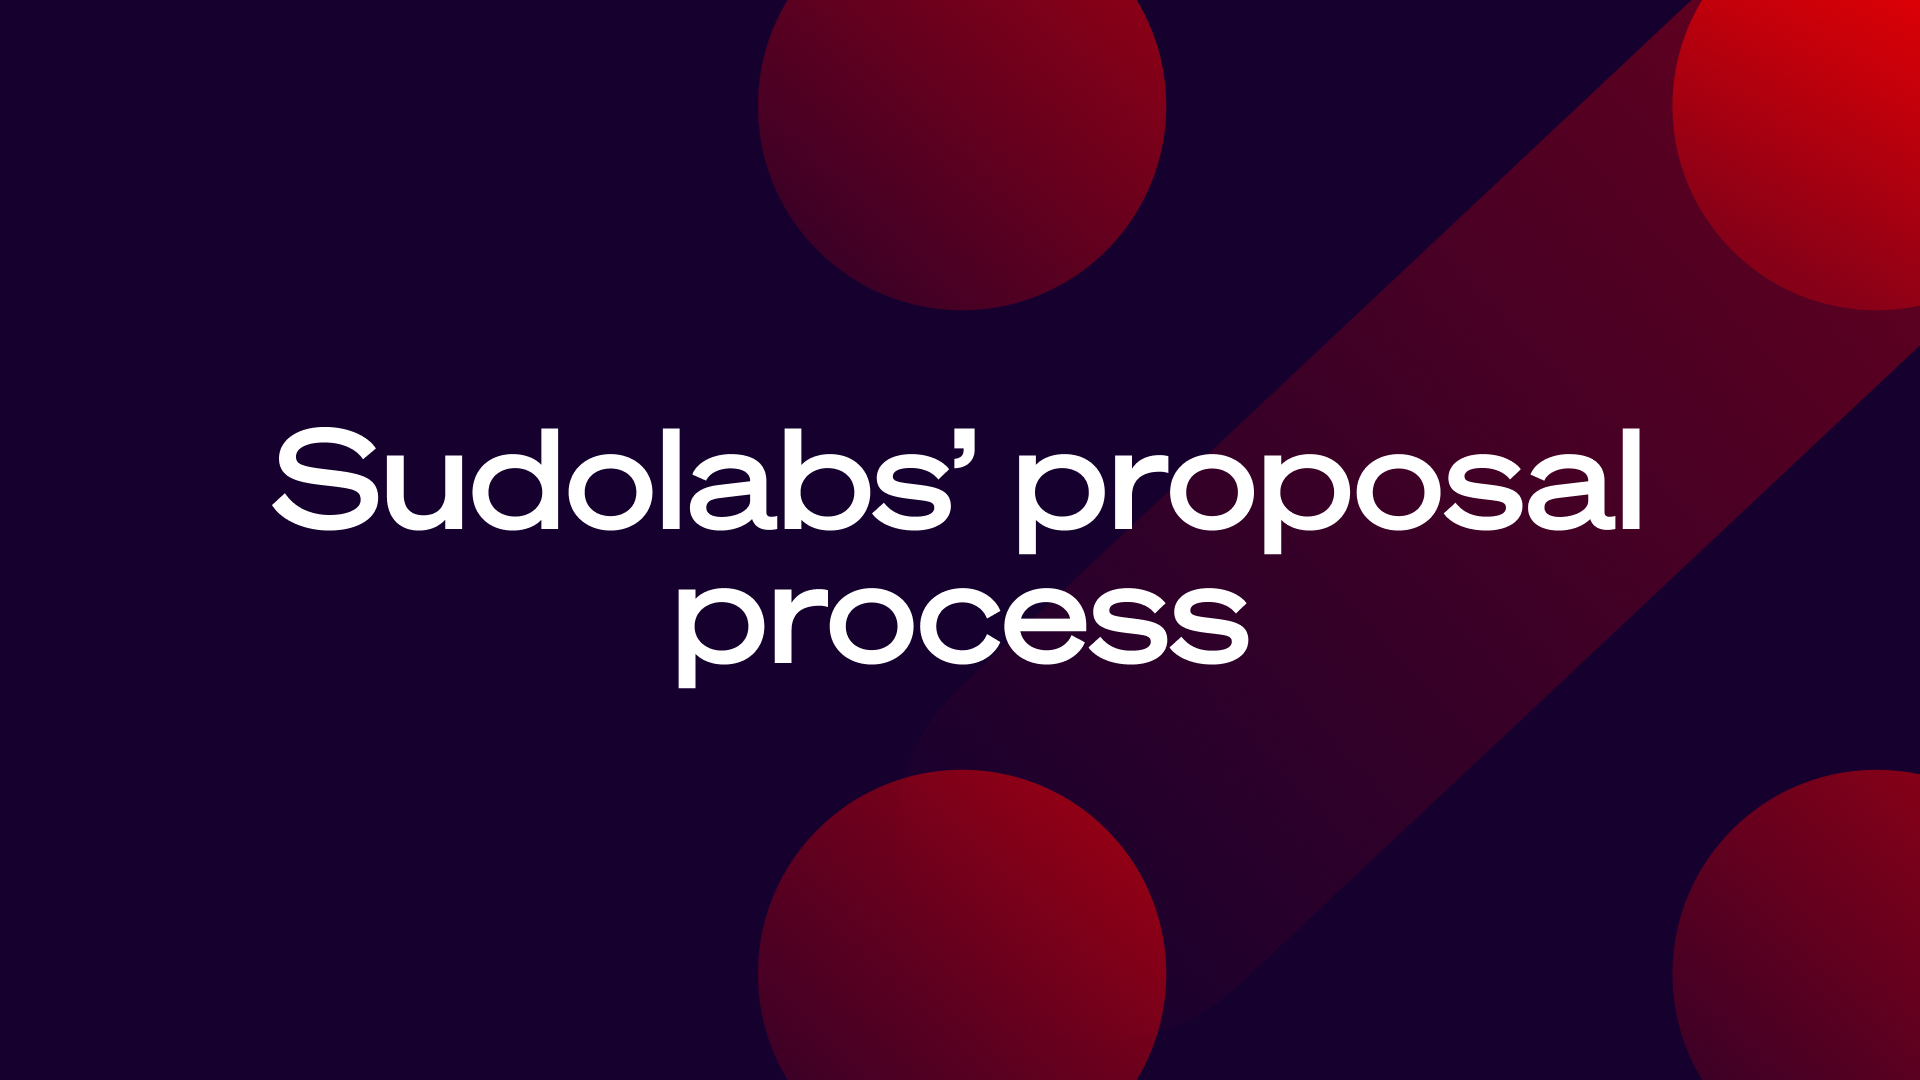 Blog cover showcasing an abstract illustration symbolizing Sudolab's proposal process. The image incorporates Sudolab's brand icon to represent the company's unique approach to proposals and strategy. This visual complements the blog post content.